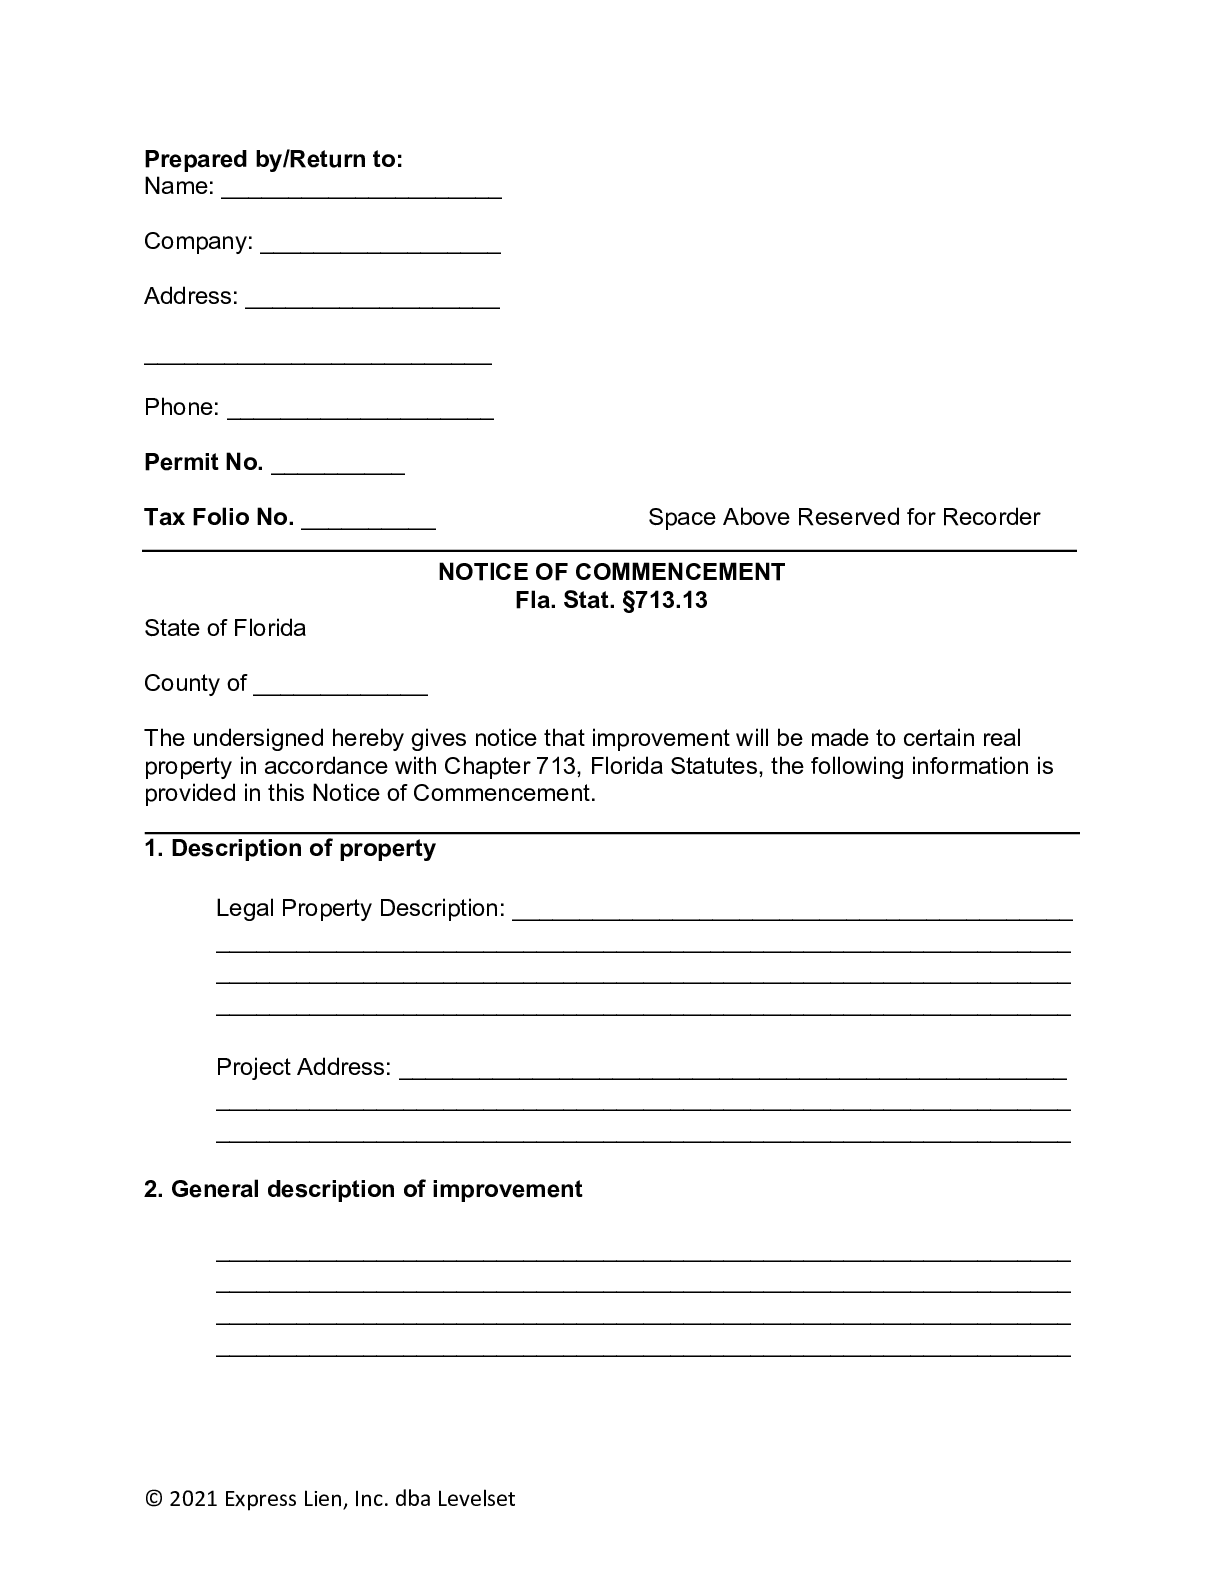 Florida Notice of Commencement Form